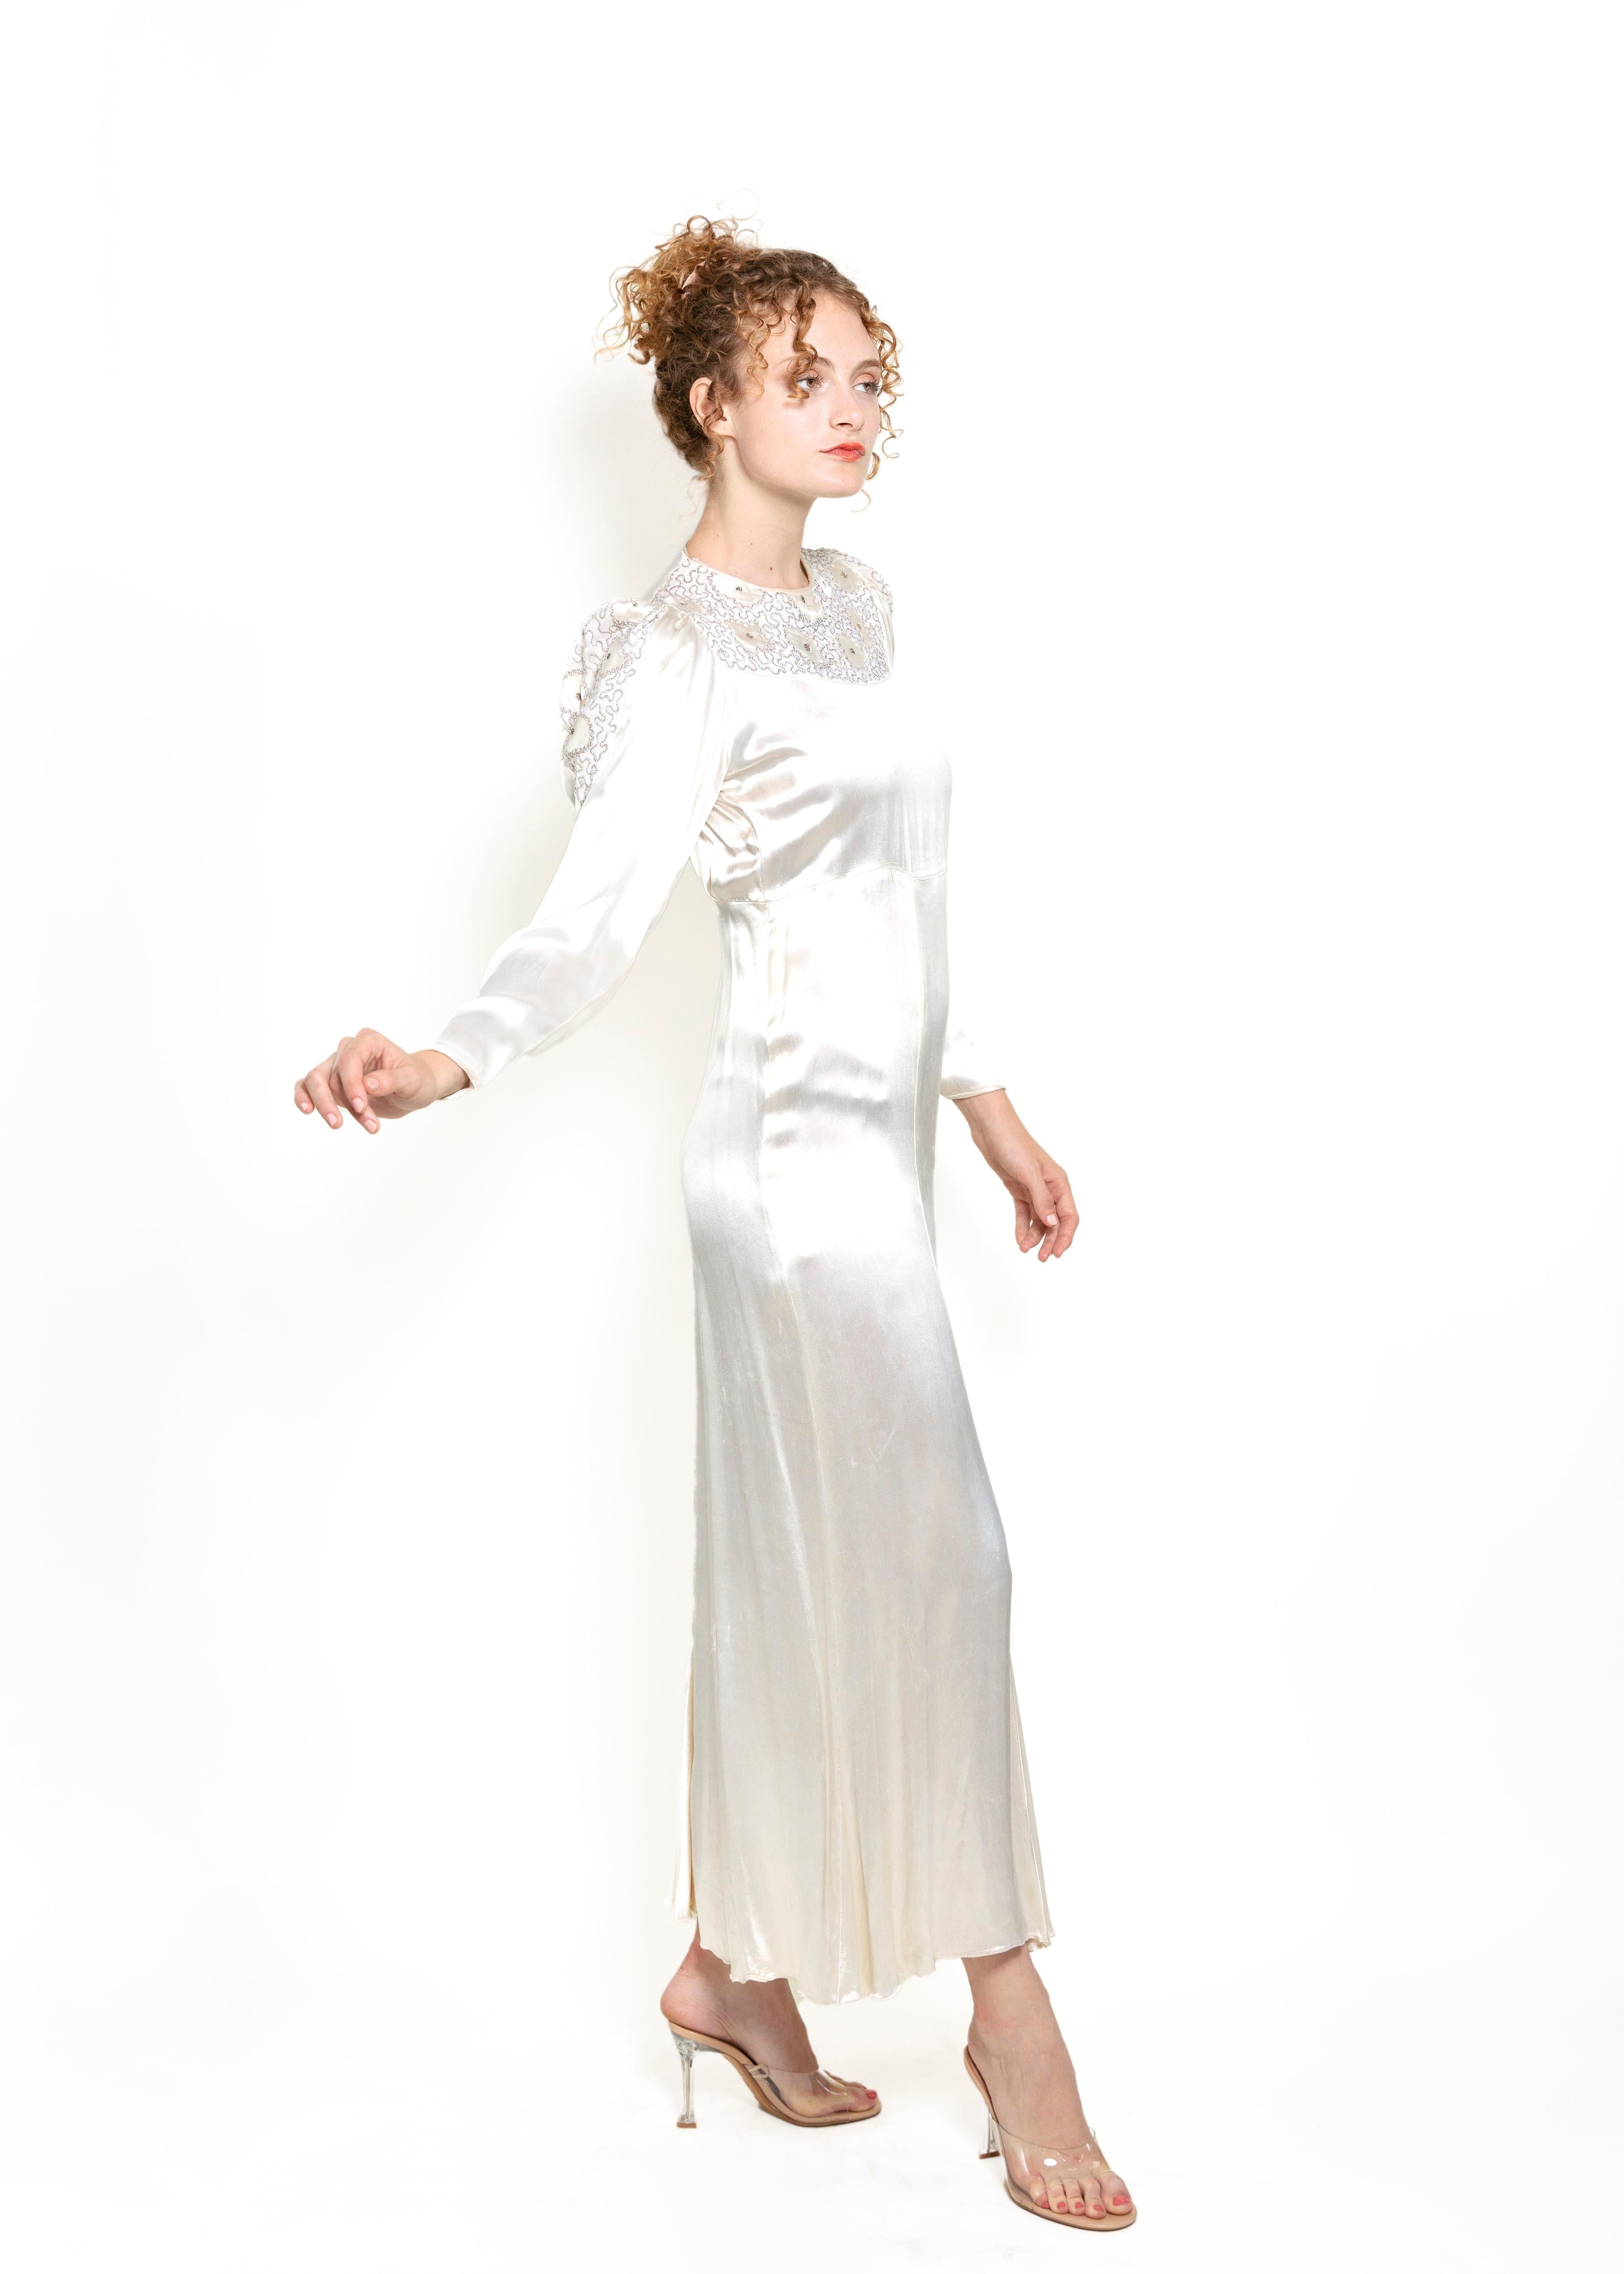 This Vintage 1930s Cream Silk Embroidered Gown is a timeless and elegant piece of wearable art. Its luxurious satin silk construction adorned with intricate embroidered detail and snap cuff sleeves creates an exclusive and sophisticated look. It's